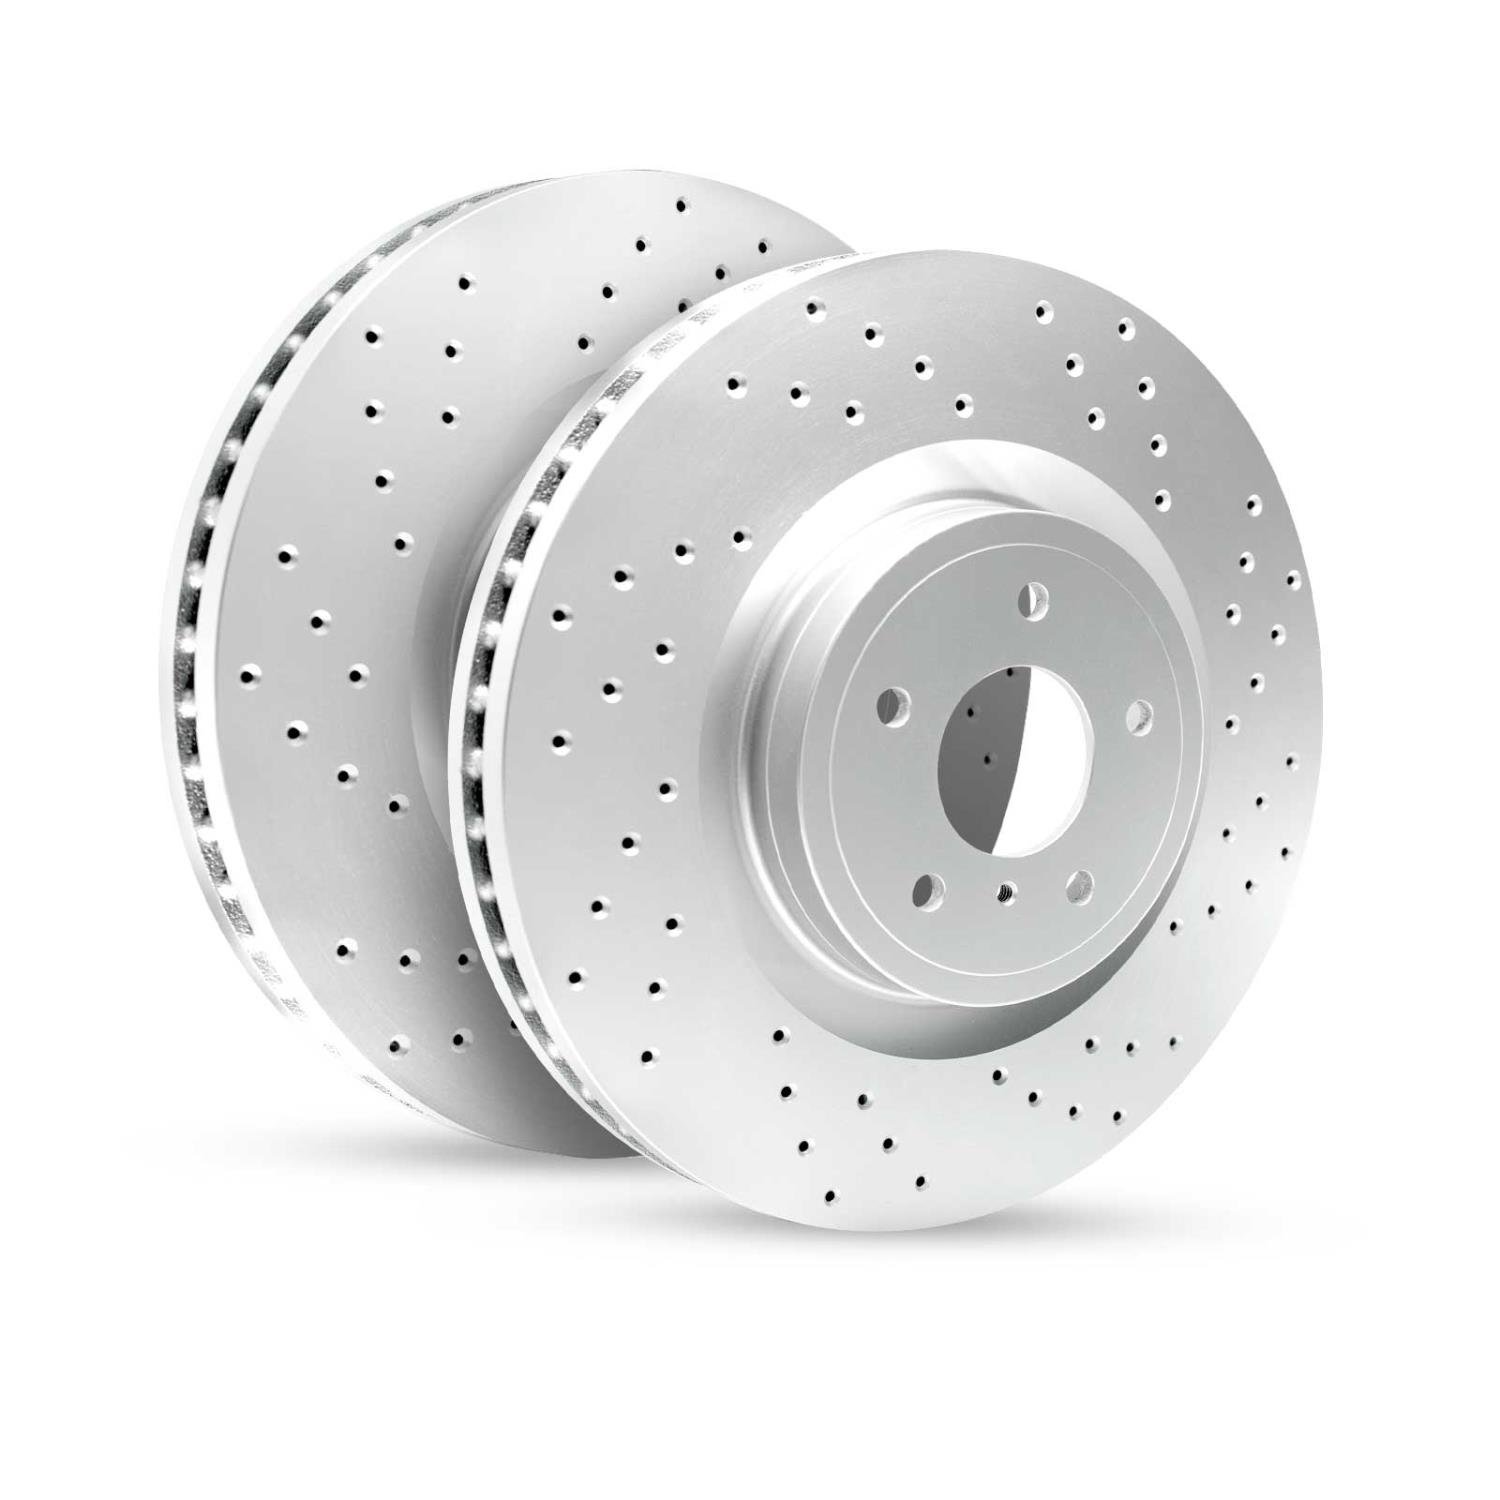 GEO-Carbon Drilled/Slotted Rotors, 1990-2016 Fits Multiple